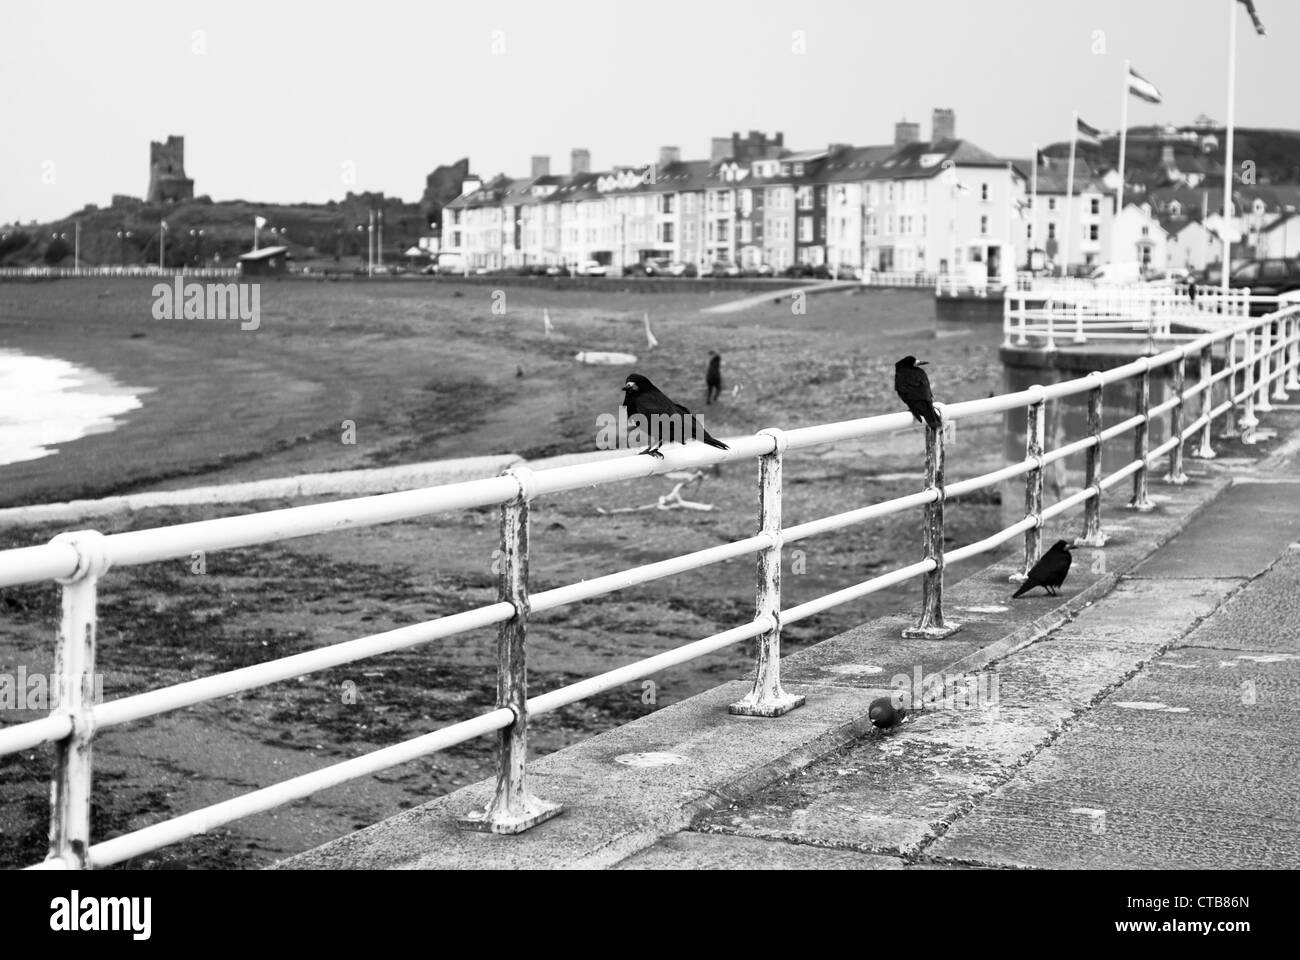 Ravens and Crows sitting on railings on a seaside promenade on a cloudy day in black and white. Stock Photo